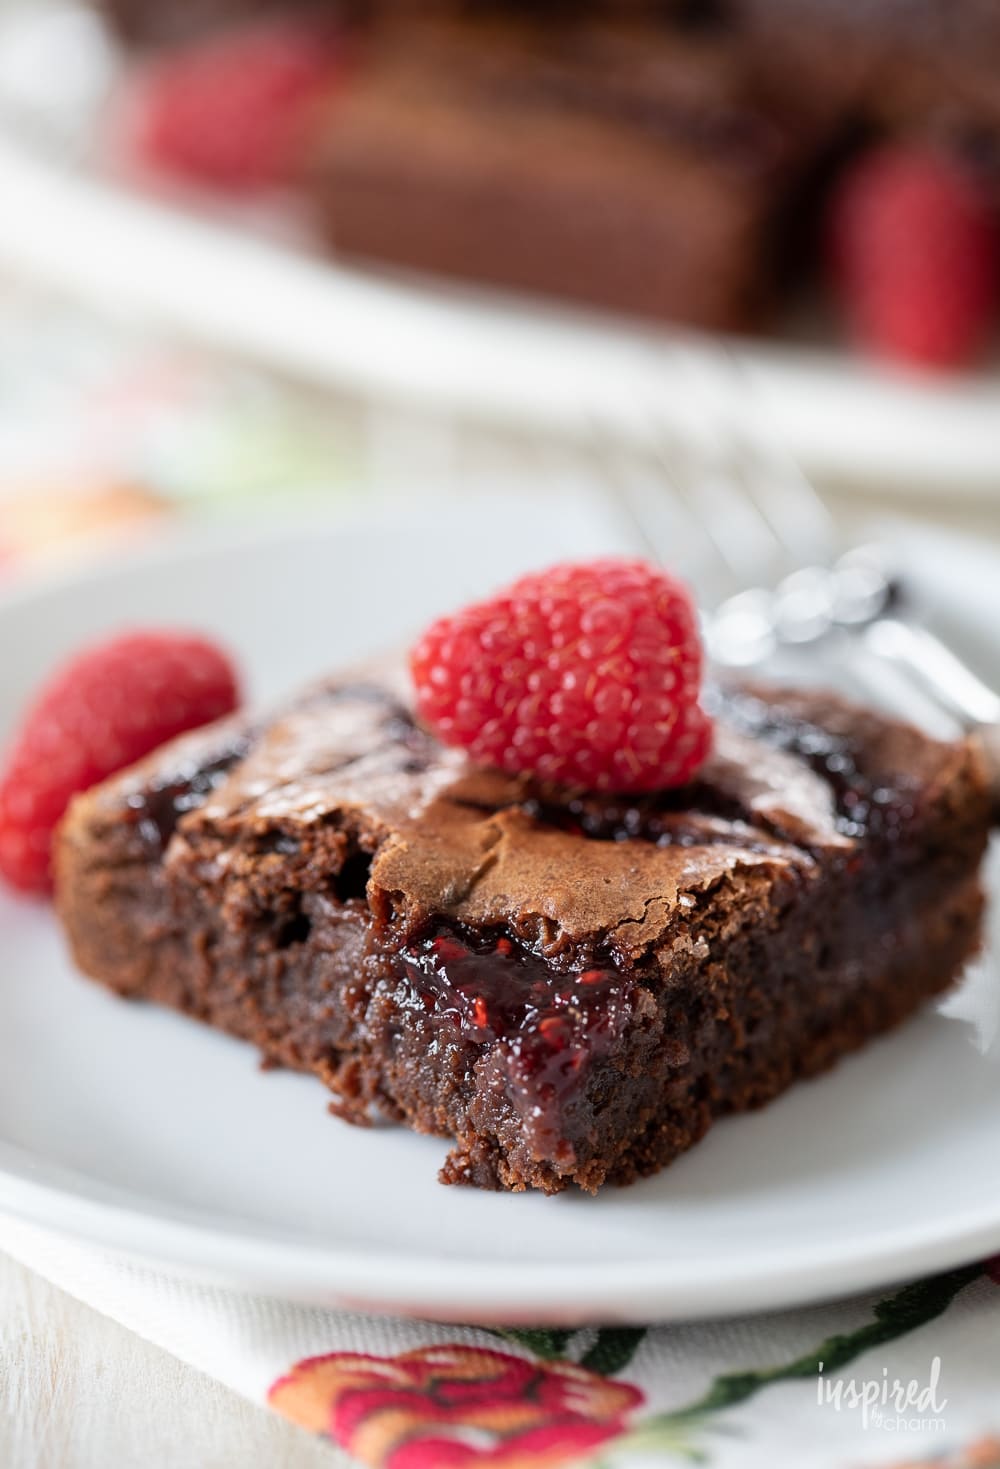 Raspberry Brownie on a plate with fork.